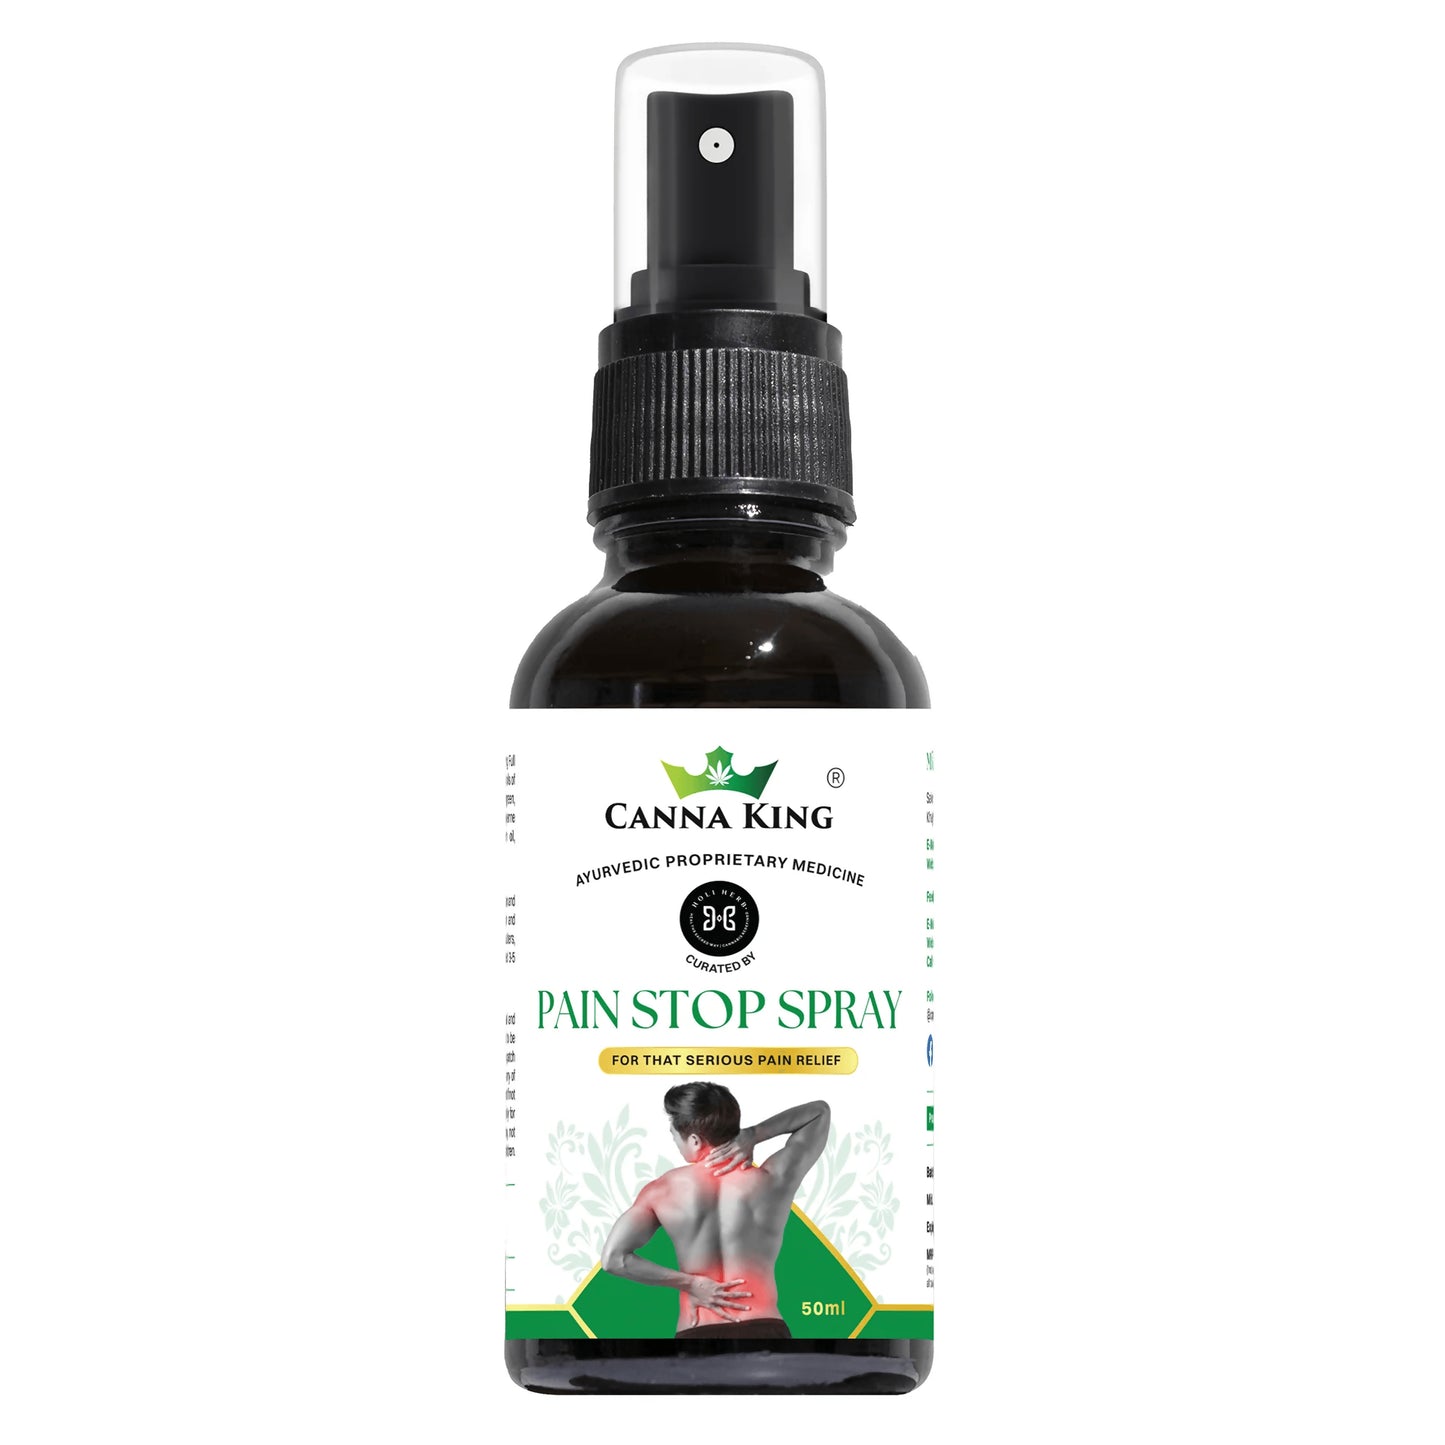 Cannaking - Pain Stop Spray: For Ultimate Pain Relief (50ml)